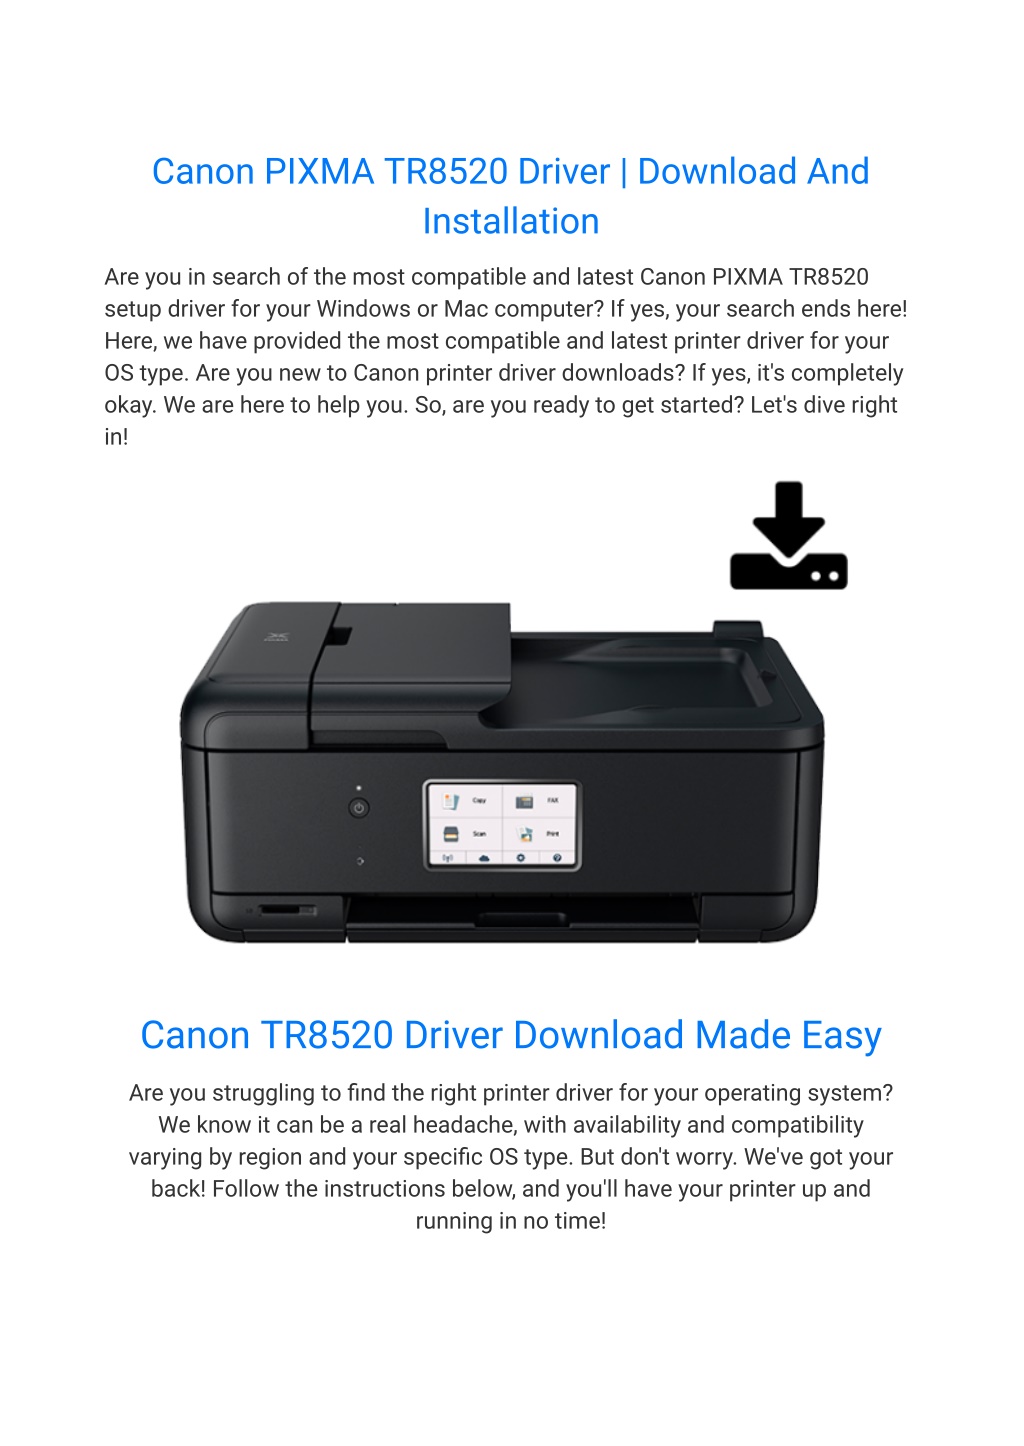 Ppt Canon Pixma Tr8520 Driver Download And Installation Powerpoint Presentation Id12075569 9444